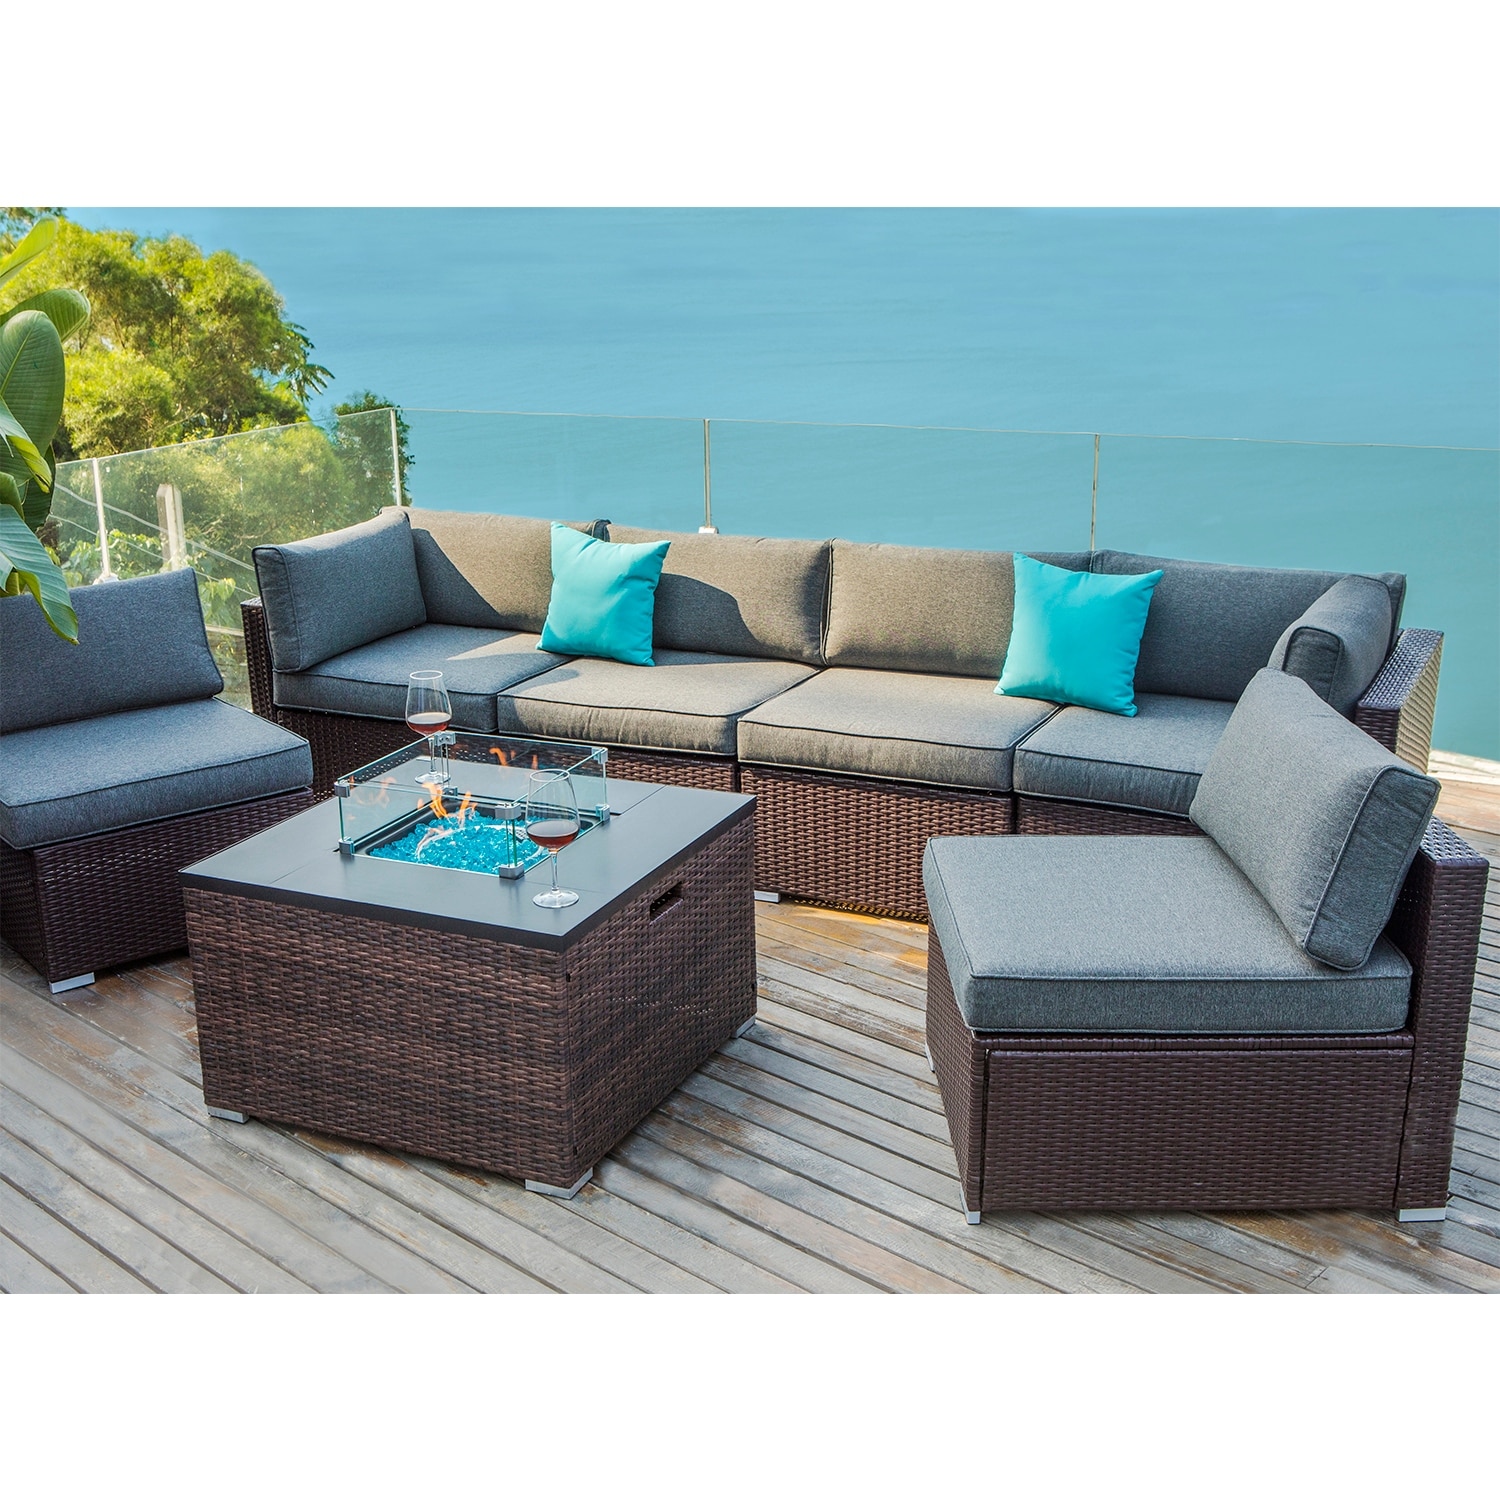 Cosiest 7 Piece Outdoor Patio Furniture Set With Fire Table Fits Tank Outside